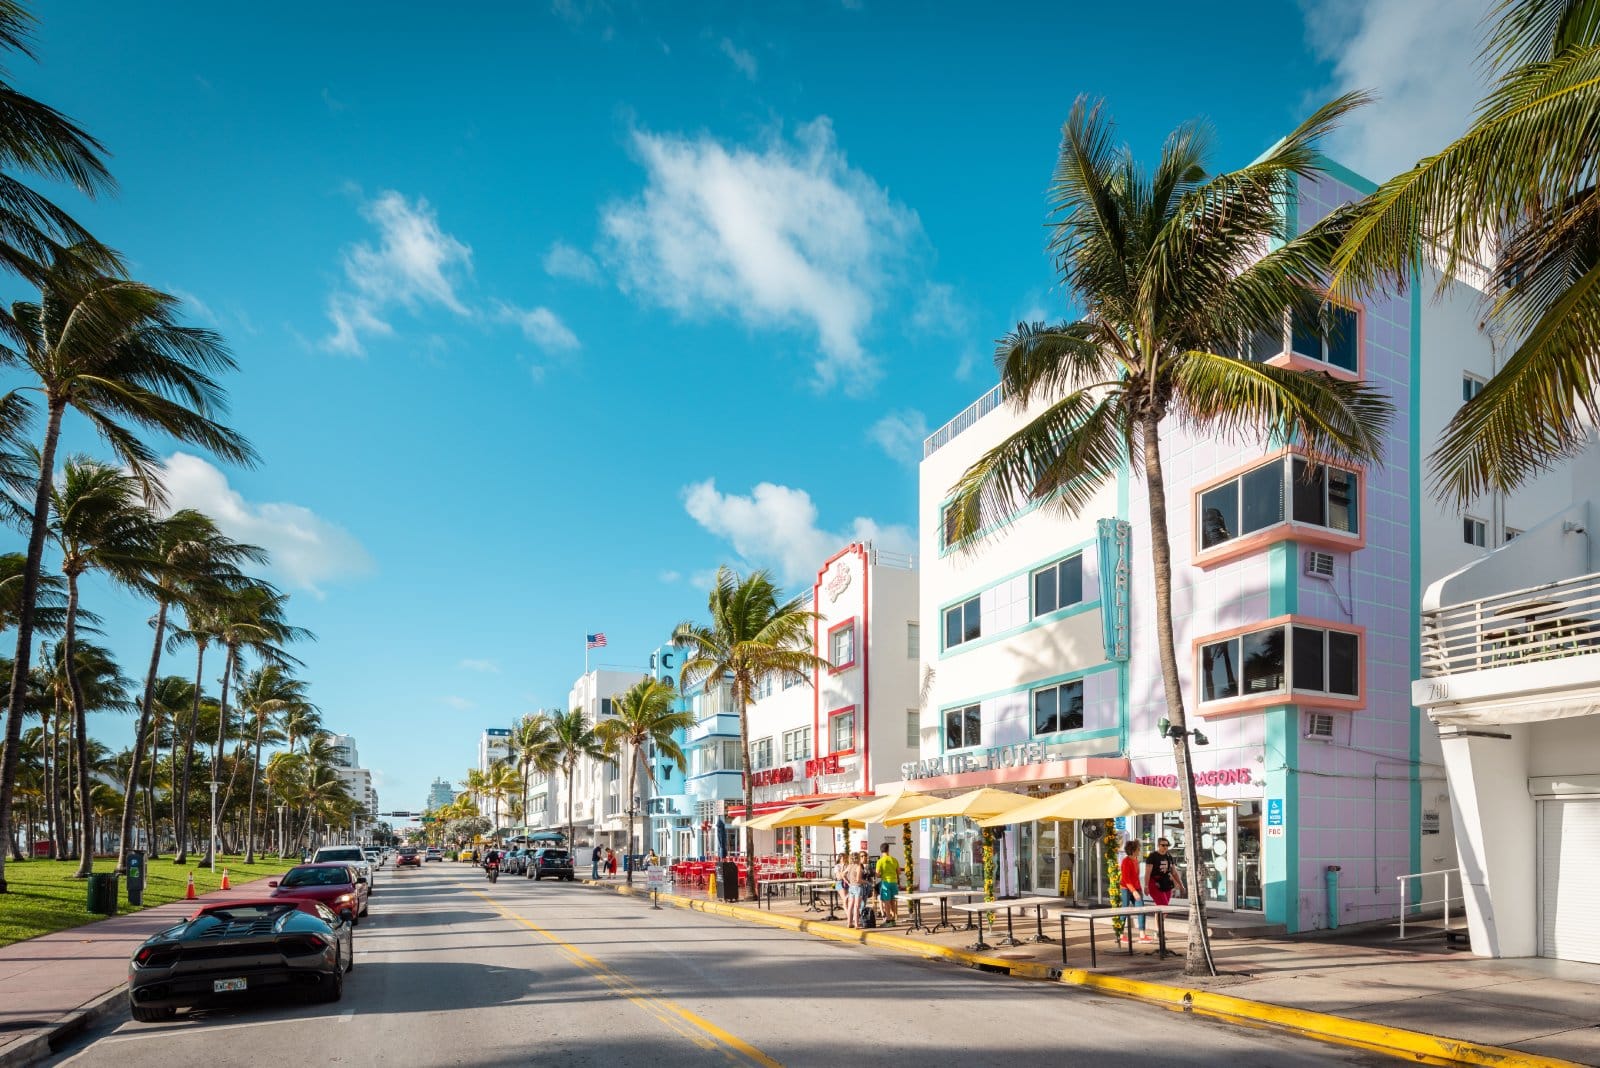 Image Credit: Shutterstock / Dmitry Tkachenko Photo <p><span>Miami’s South Beach area is famous for its gay-friendly beaches, Art Deco district, and lively LGBTQ+ scene, especially during Miami Beach Pride.</span></p>